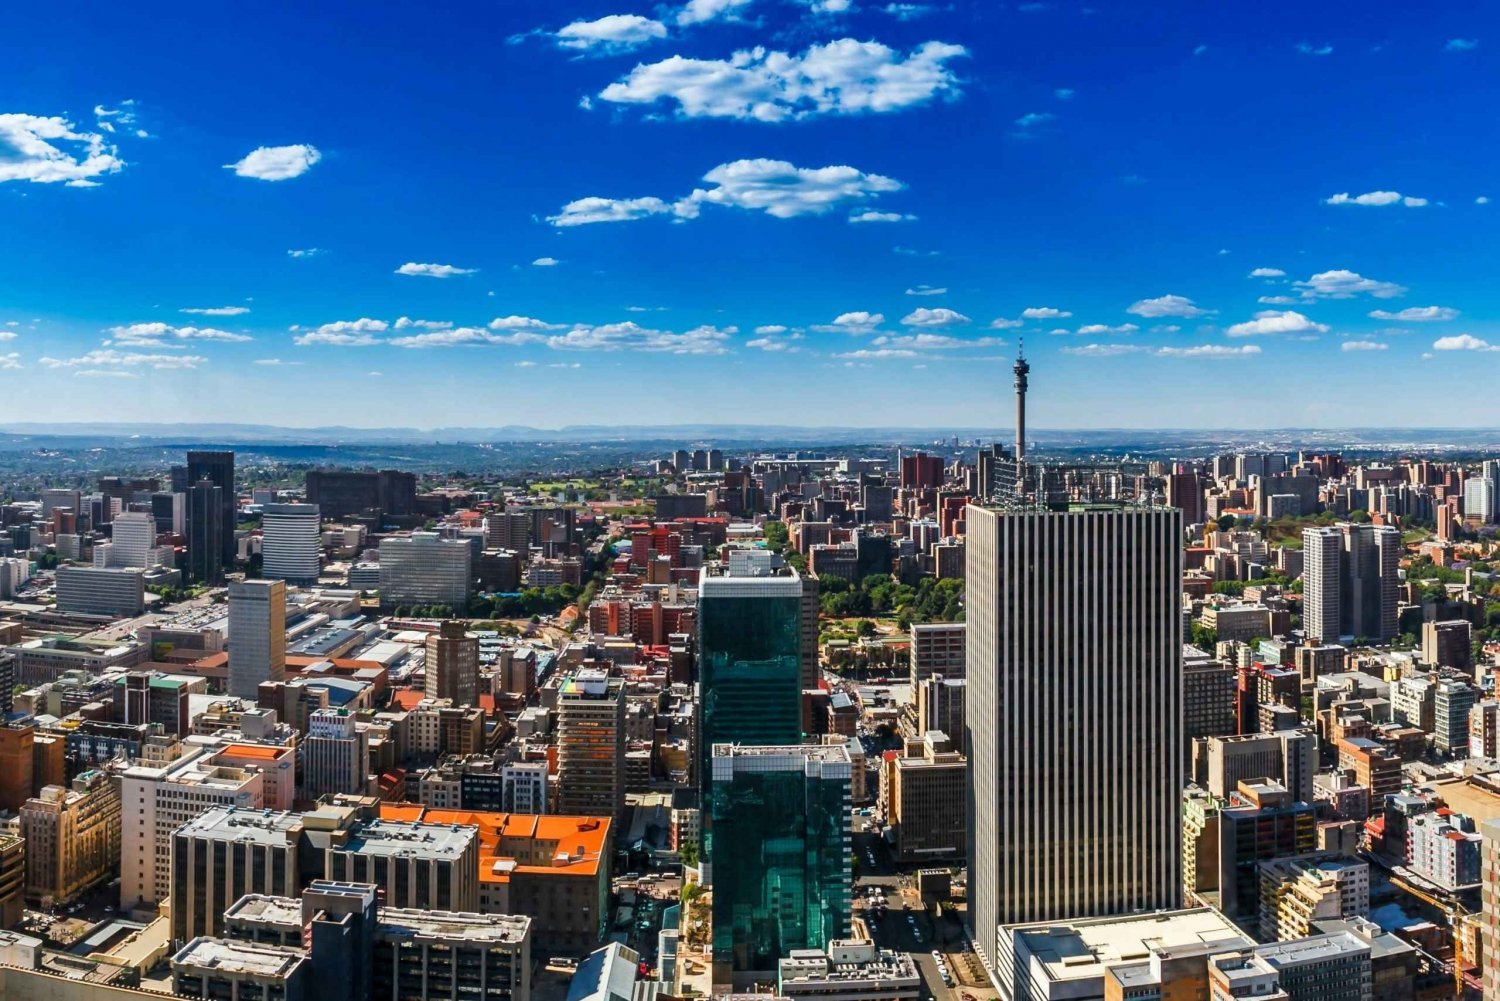 Johannesburg My Jozi City & Township Tour with Lunch